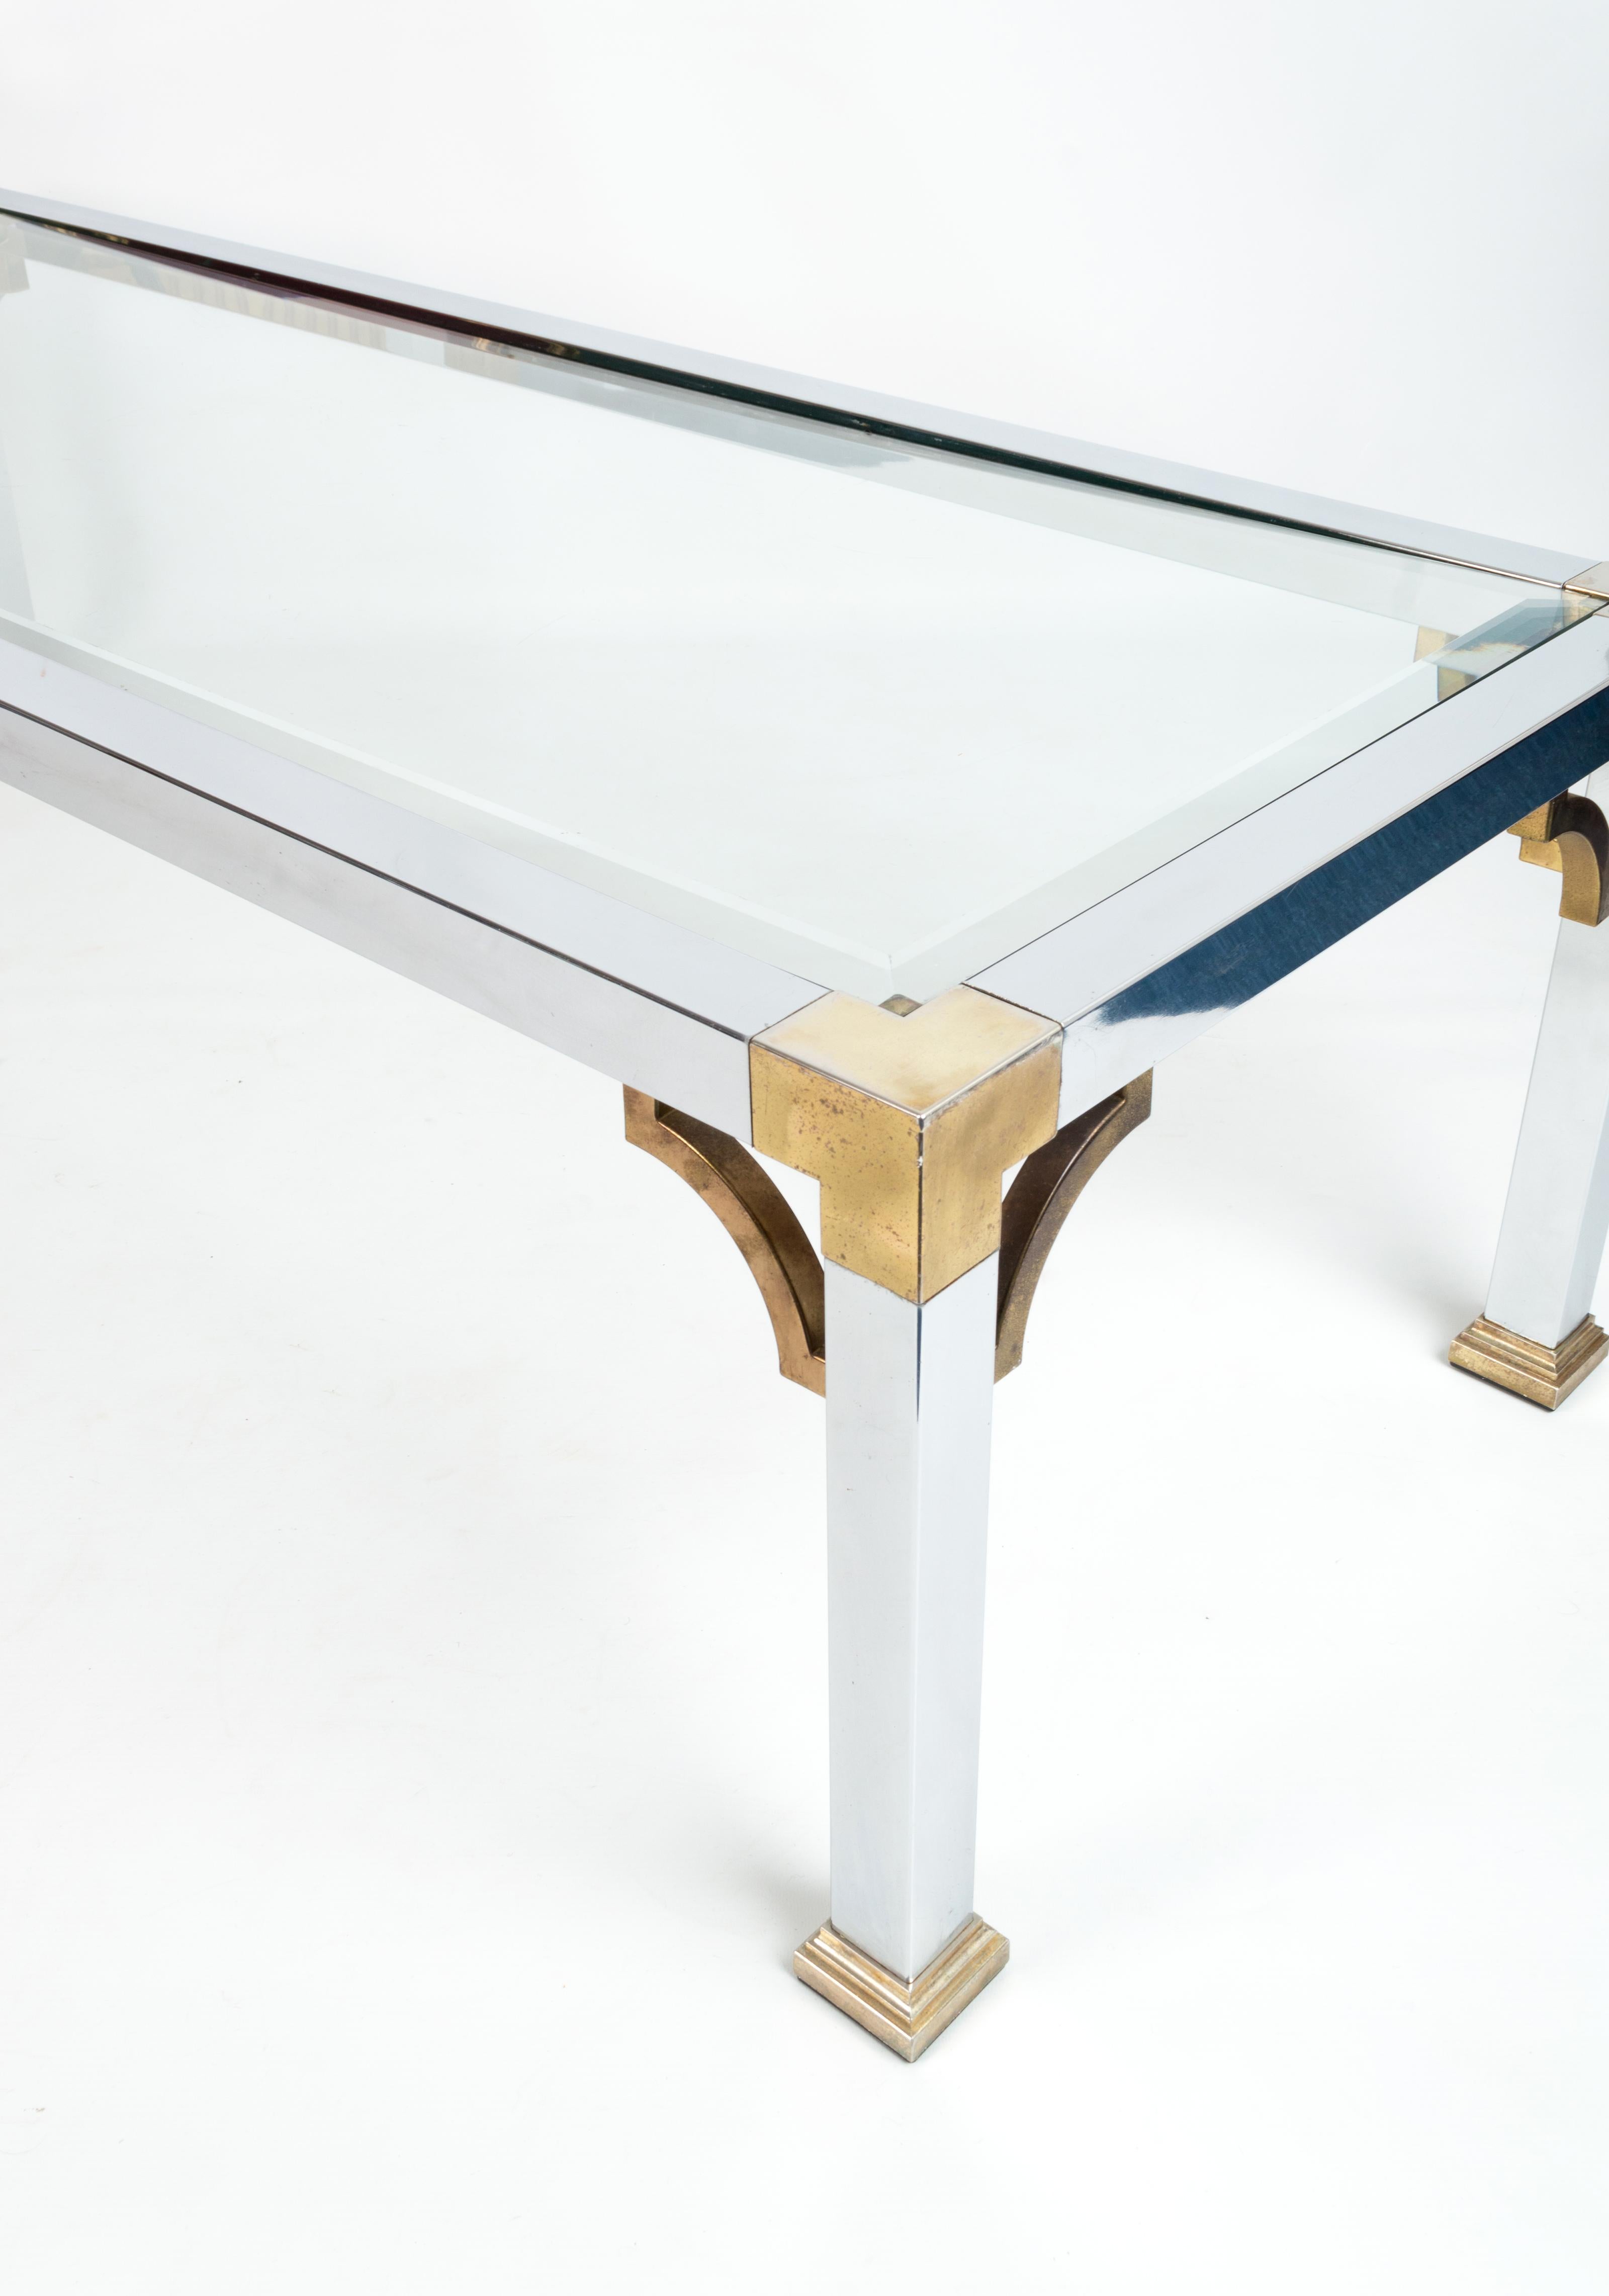 20th Century Mid-Century Chrome and Brass Long Glass Top Coffee Table, Italy C.1970 For Sale